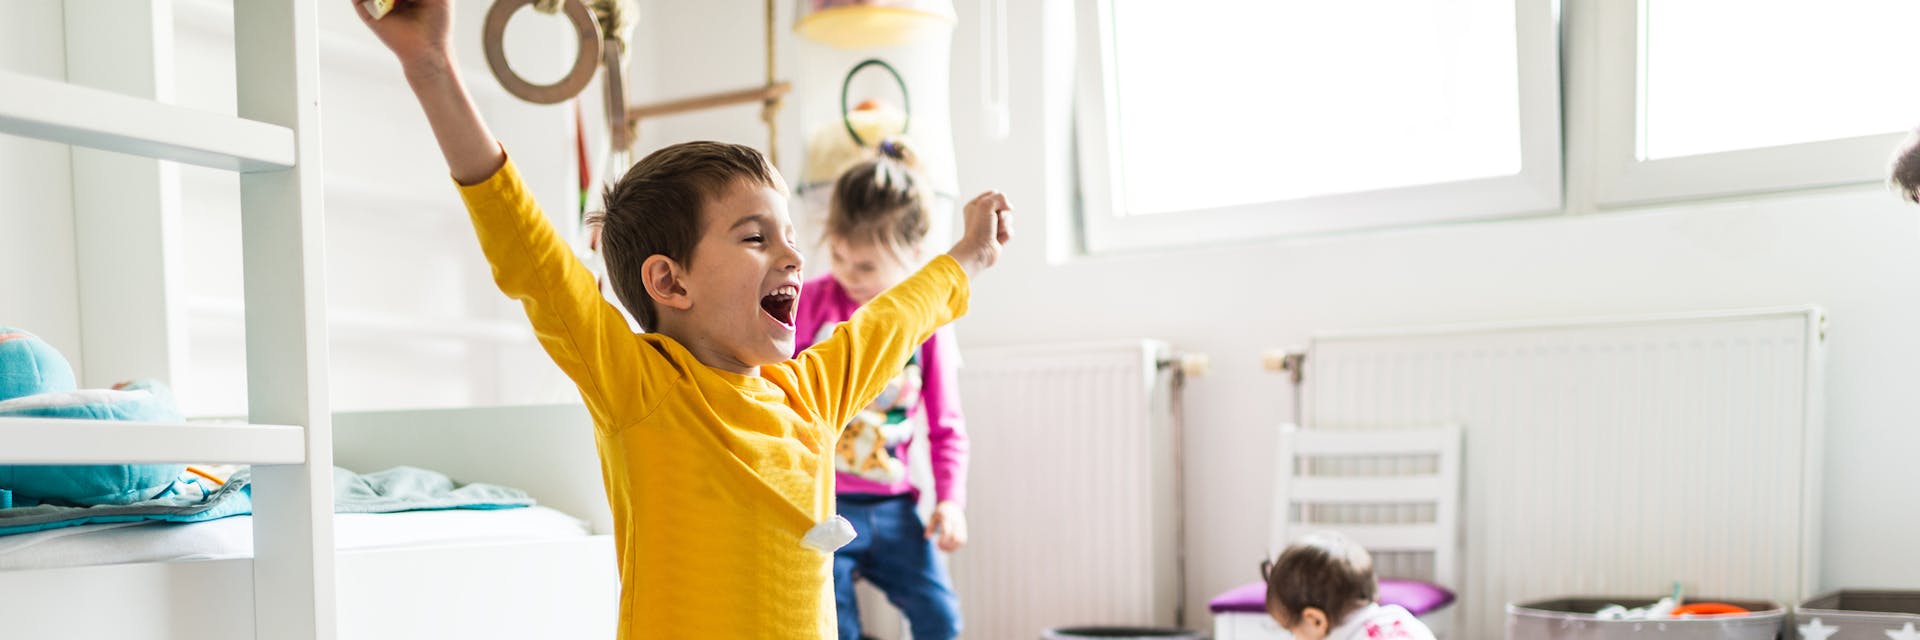 41 Funnest Indoor Games for Kids to Play Safely at Home